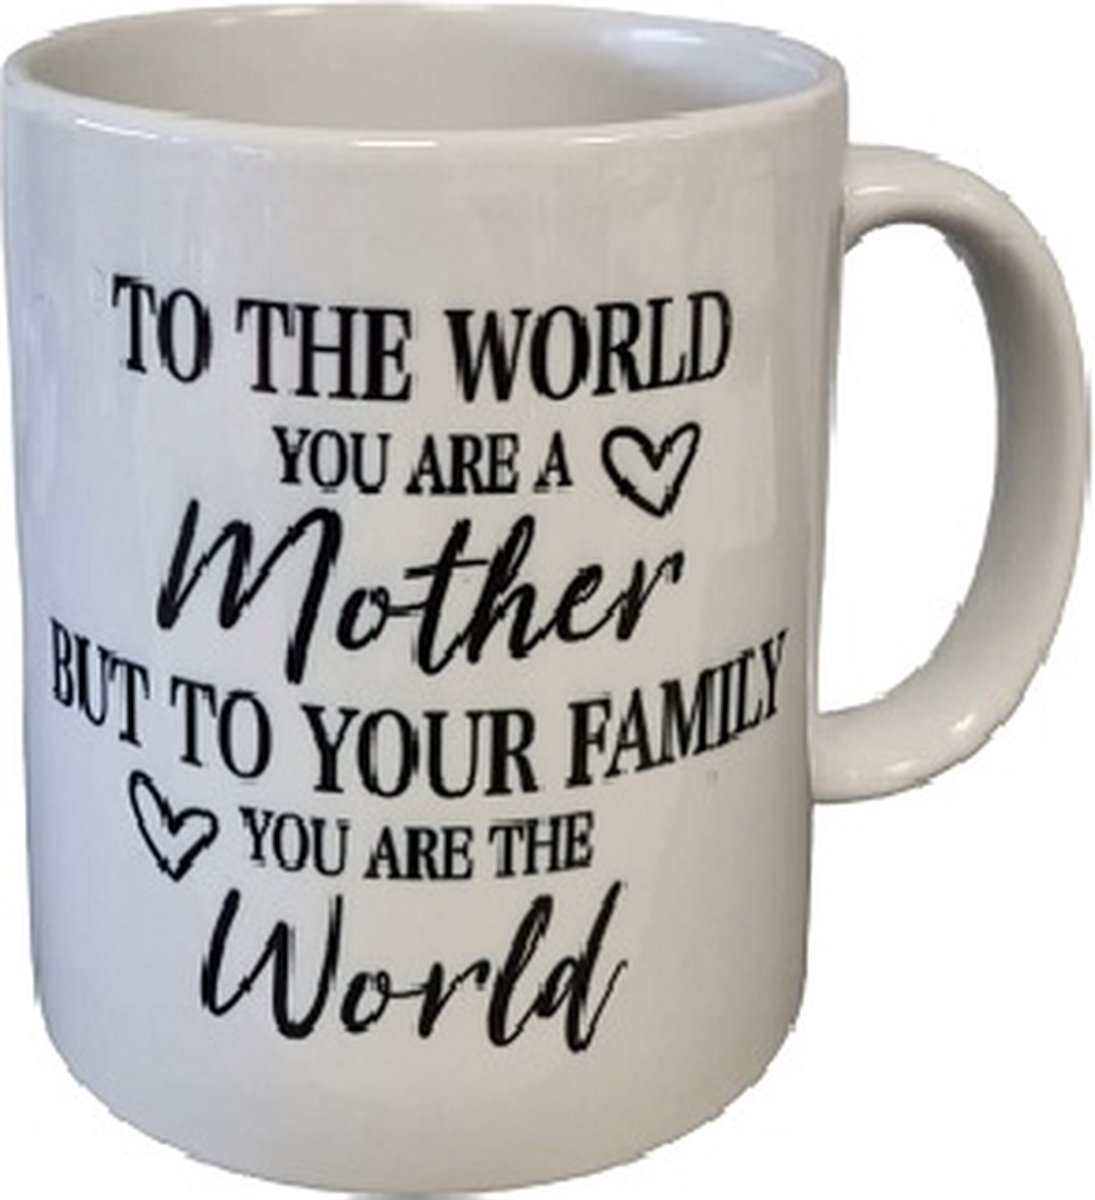 LBM mok mama - 'to the world you are a mother, but to your family you are the world - 325 ml